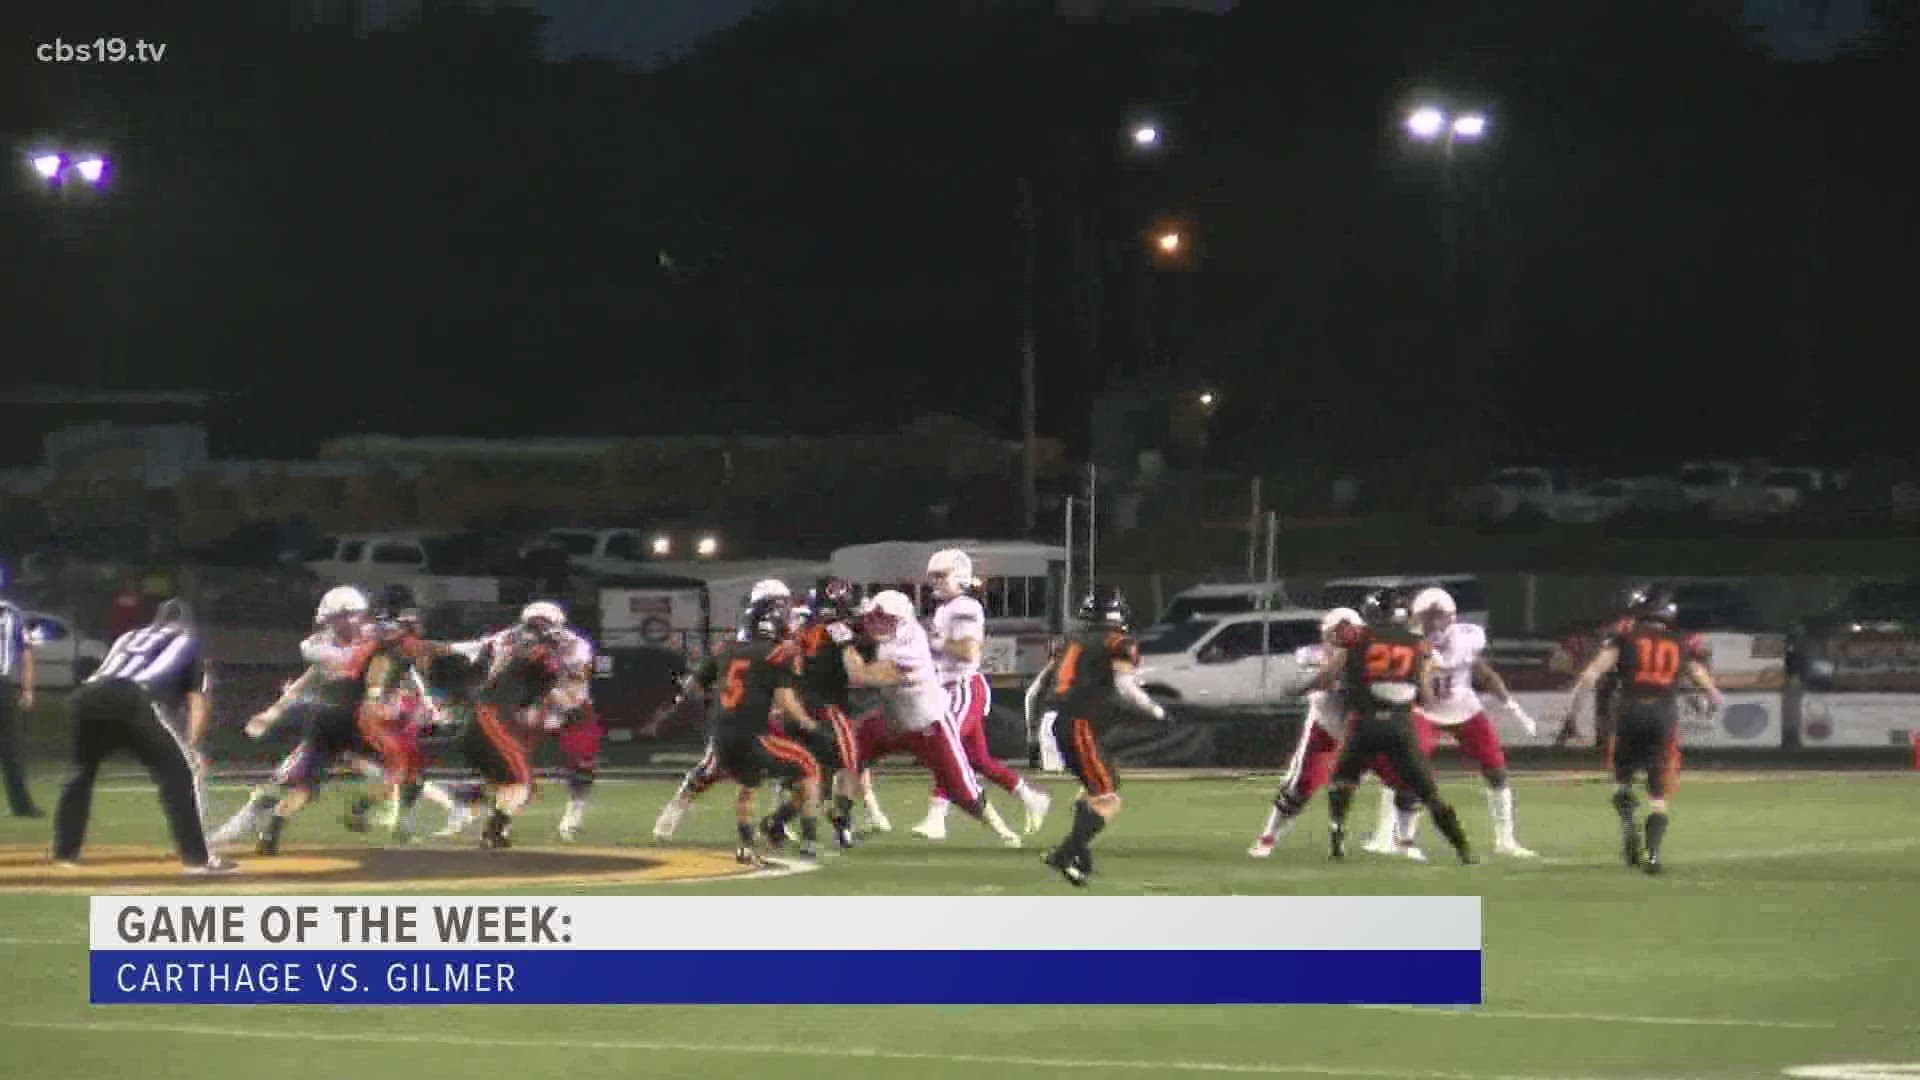 The Carthage Bulldogs traveled to Gilmer to take on the Buckeyes in Week 5 of the Texas high school football season.